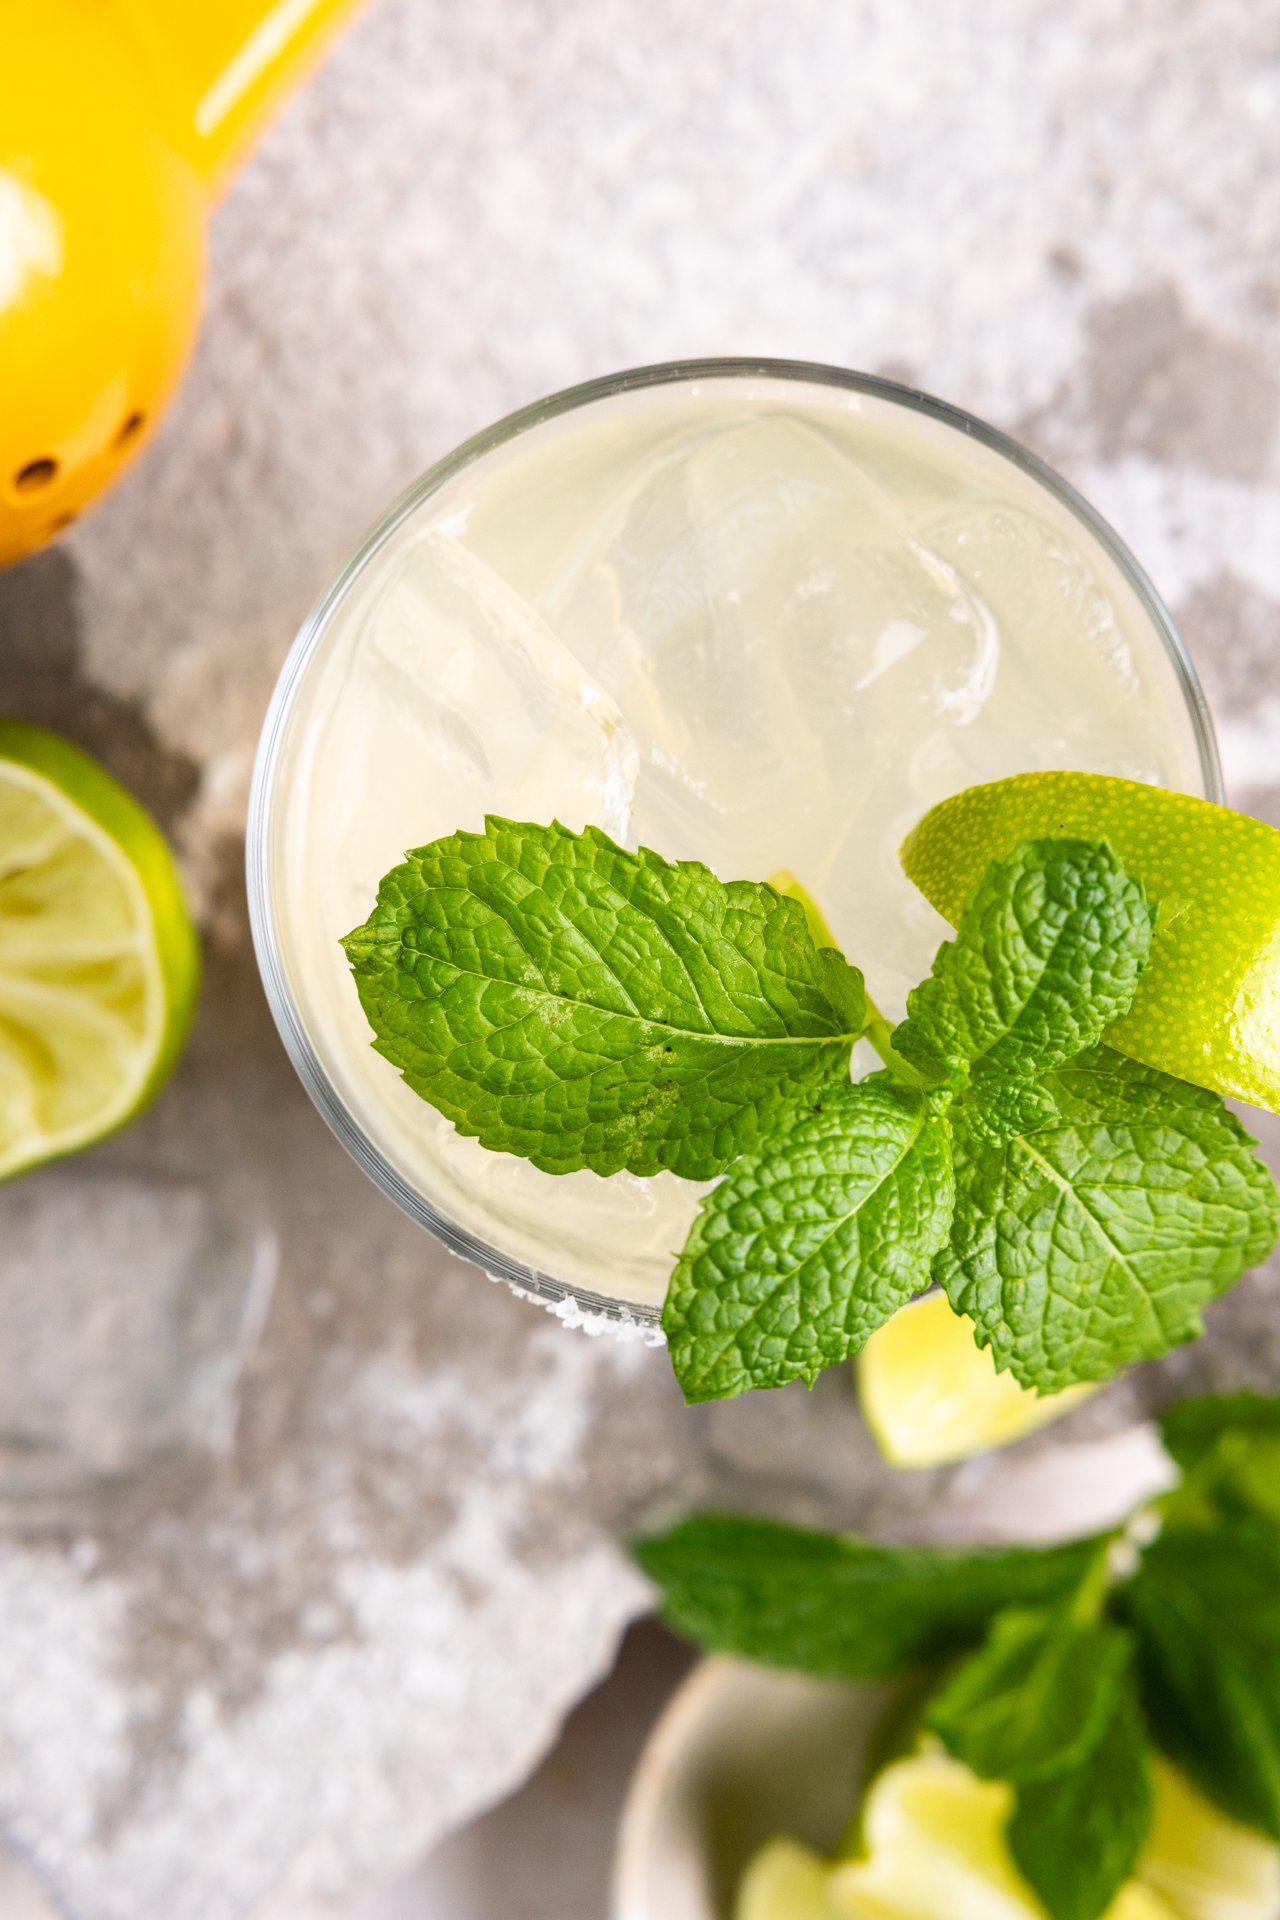 Overhead of a glass with margarita showing ice and mint leaf garnish.